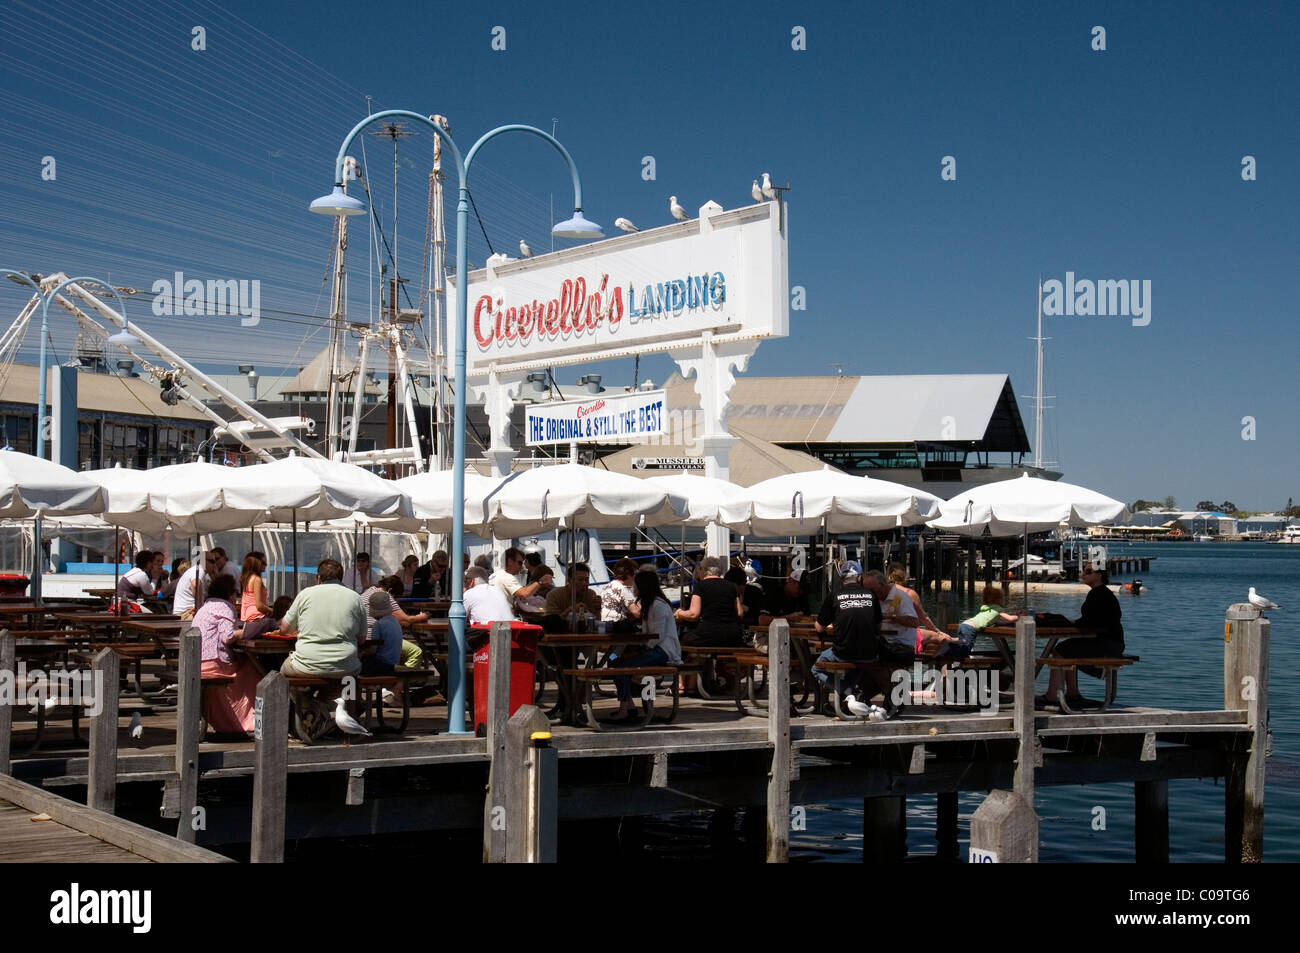 Lunching at Cicerello's Landing on the waterfront at Fremantle, Western Australia Stock Photo